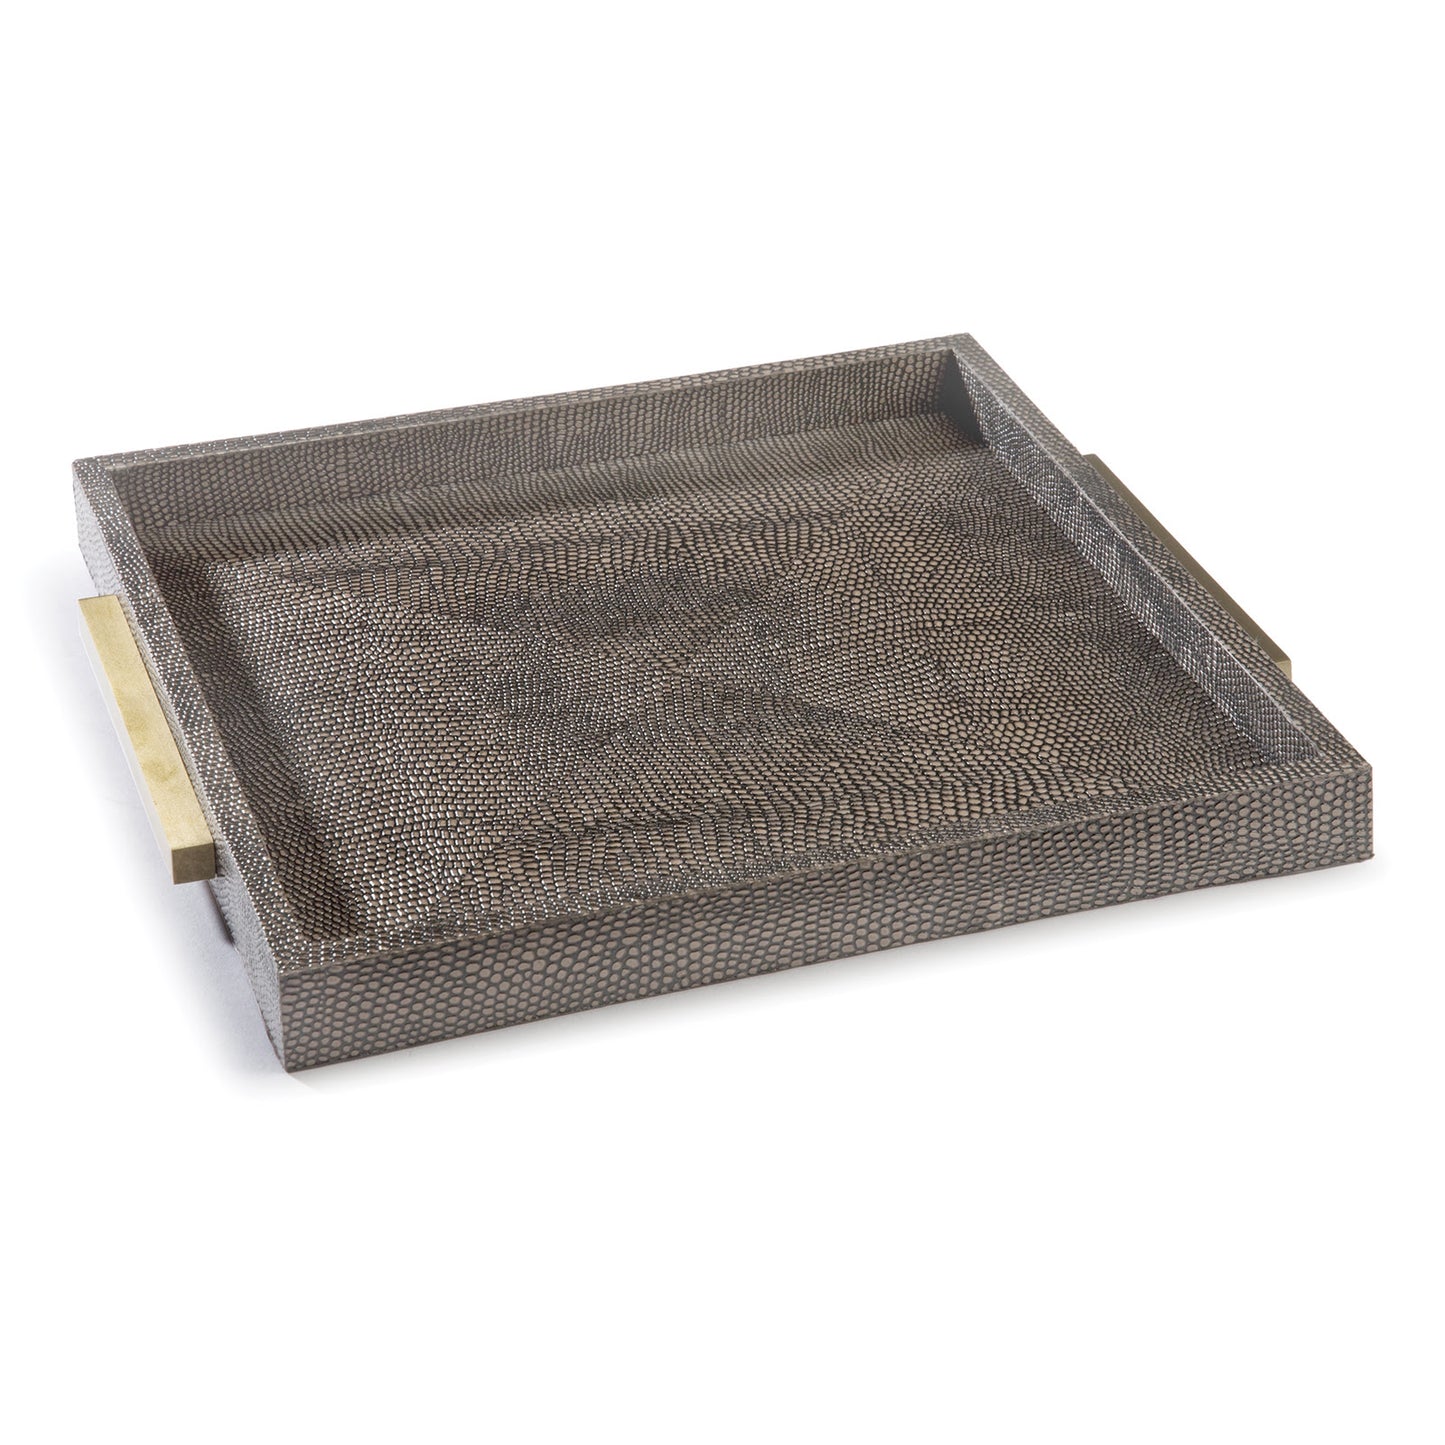 Square Shagreen Boutique Tray in Vintage Brown Snake by Regina Andrew